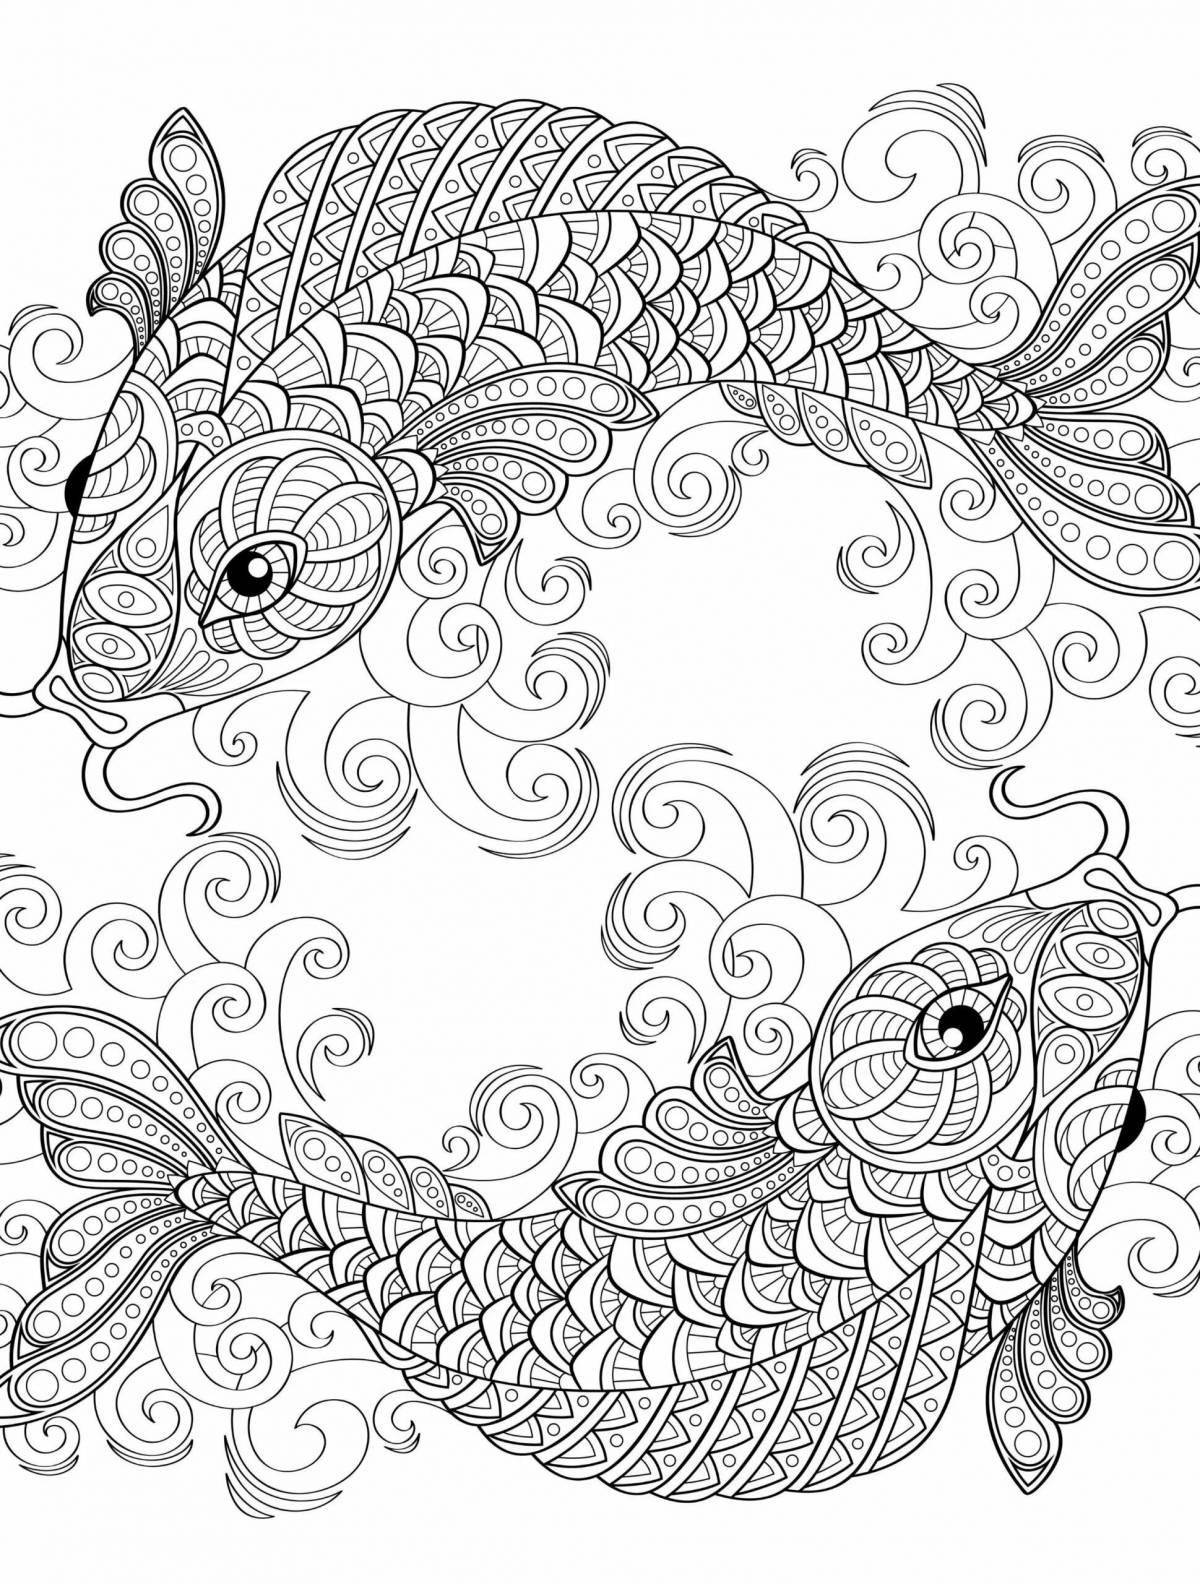 Exciting coloring book relaxation antistress for adults